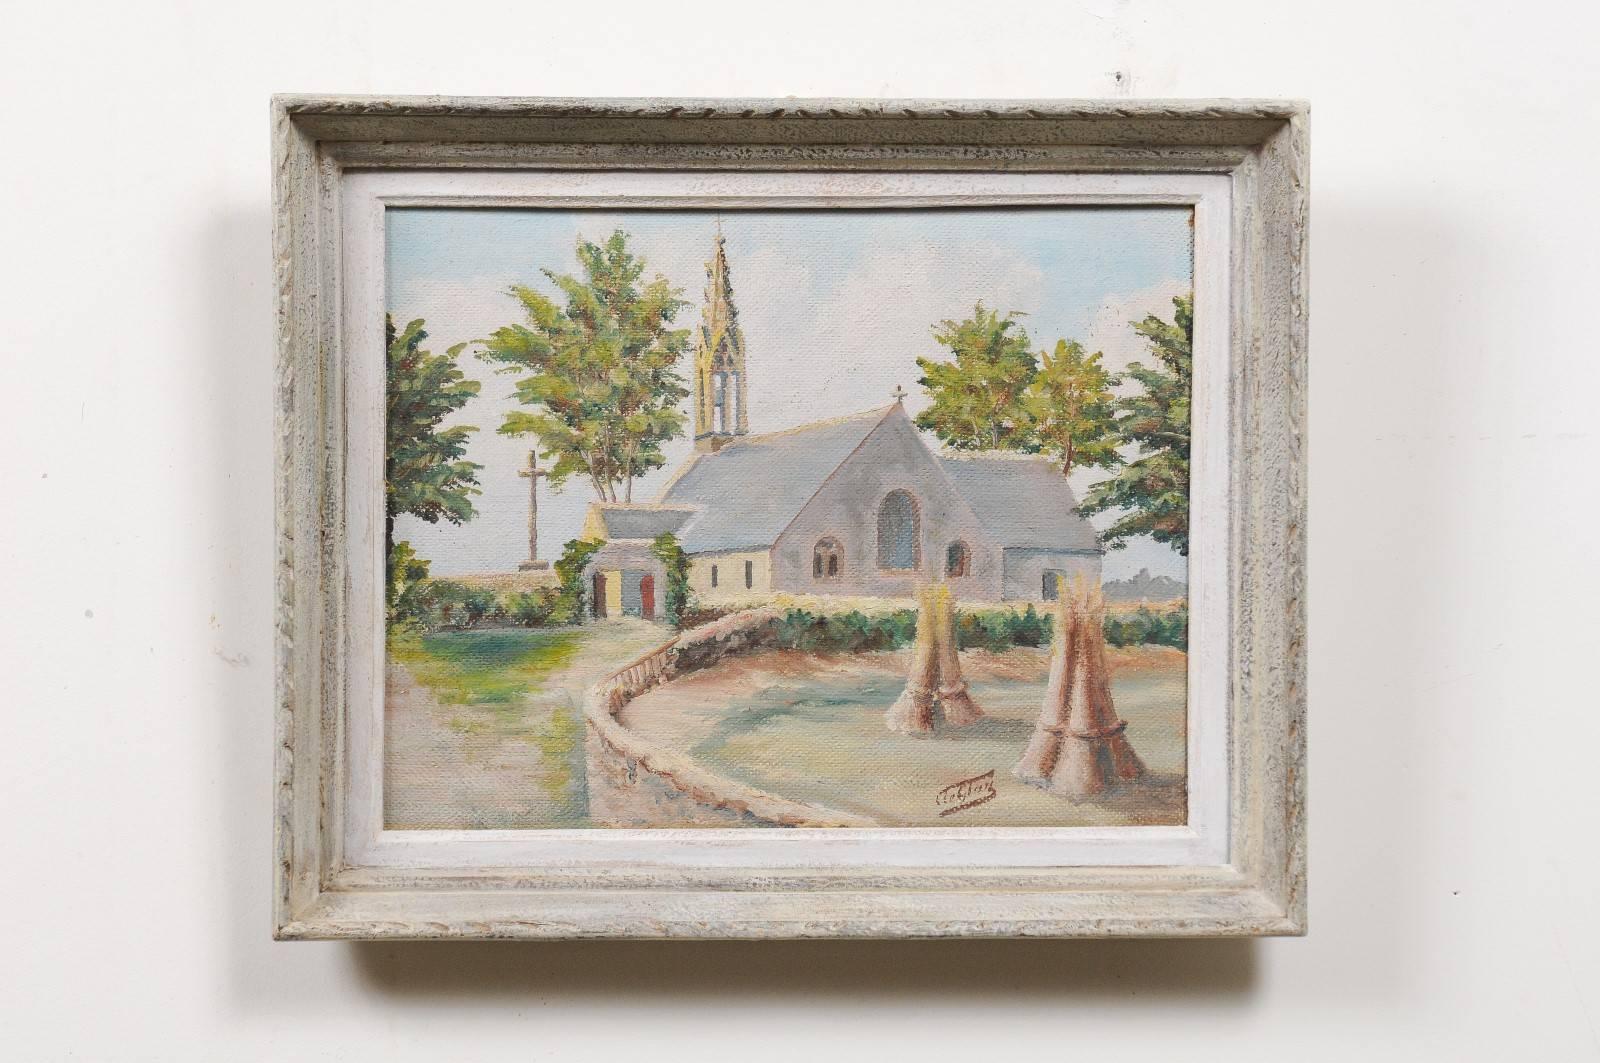 A French 19th century framed oil on wood painting depicting the chapel of Trémalo near Pont-Aven, Brittany. This petite French oil on wood painting depicts a chapel located near the artistic town of Pont-Aven in Northwestern France. Famous for its